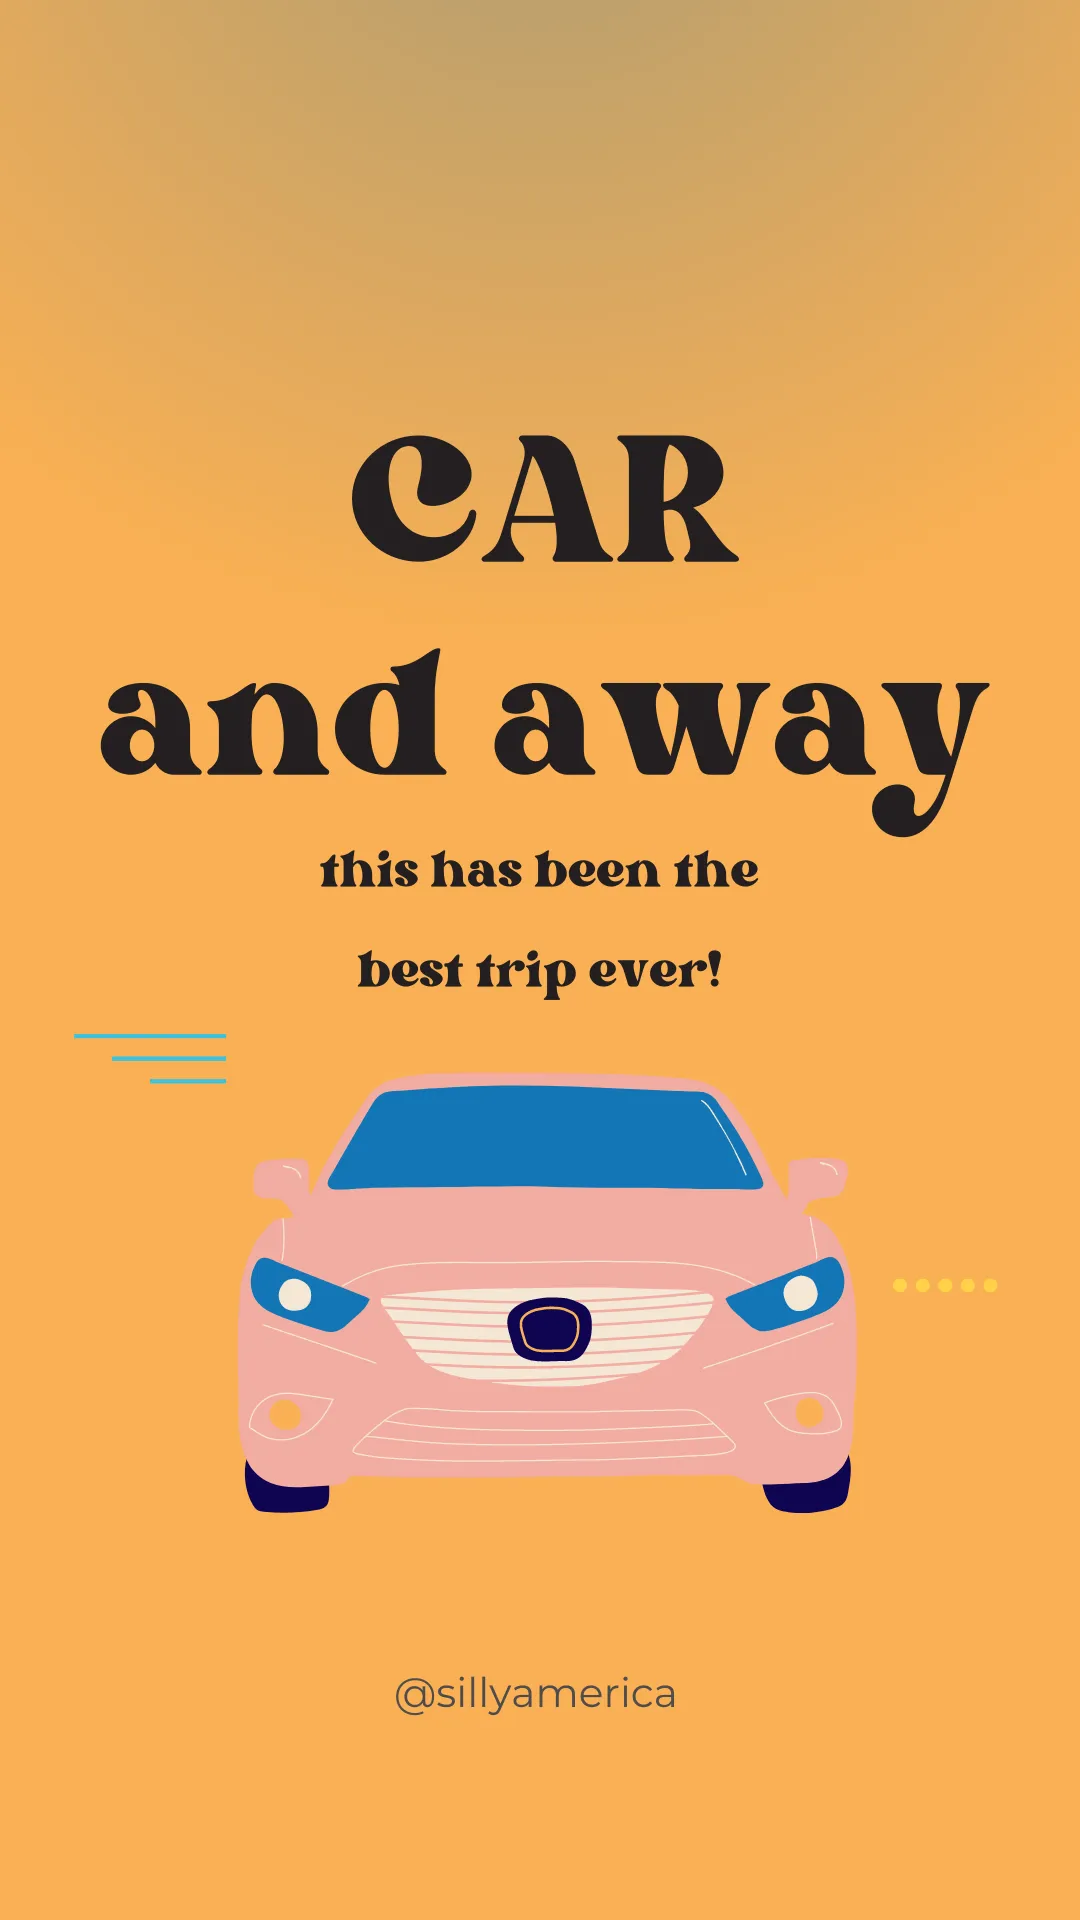 CAR and away, this has been the best trip ever! - Road Trip Puns